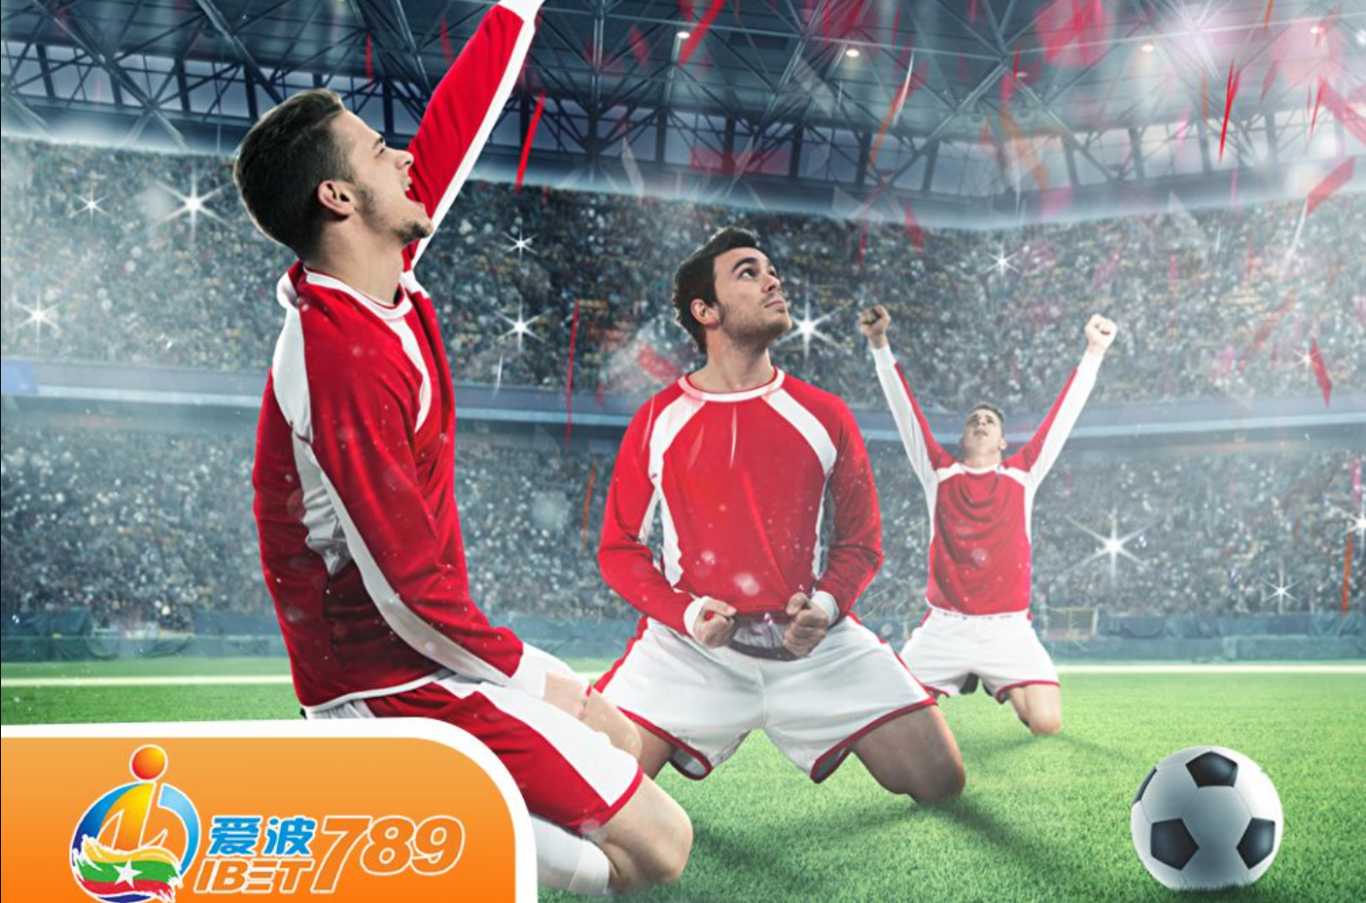 Sports betting types in iBet789 online bookmaker